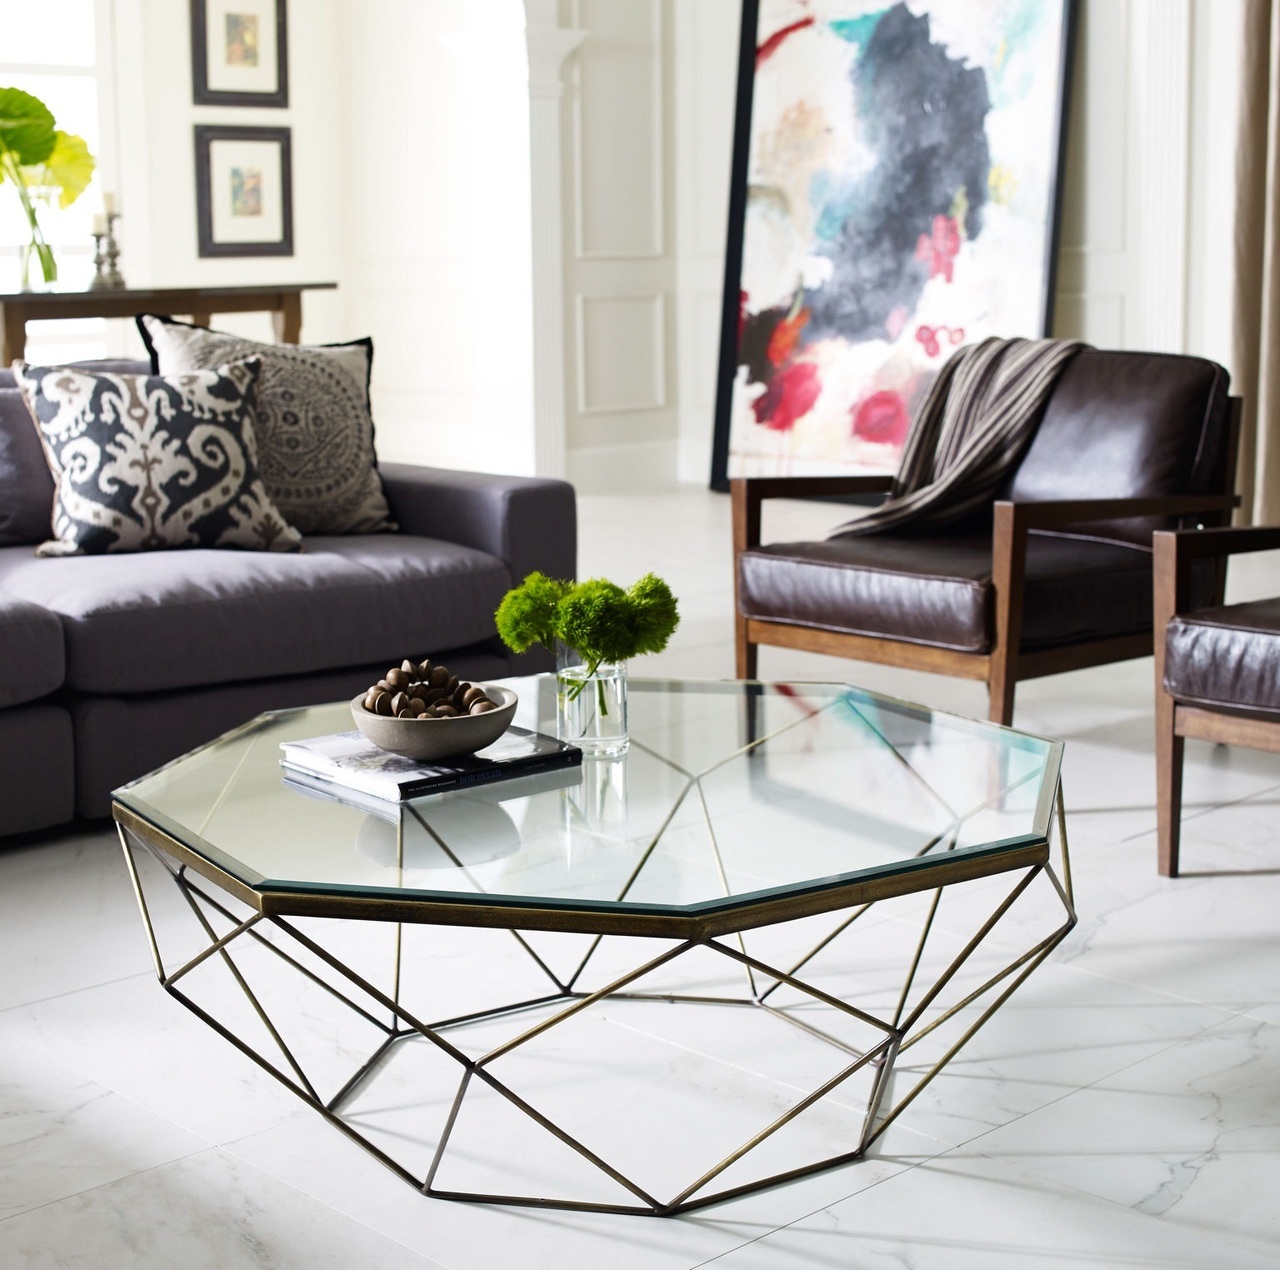 A-geometric-glass-coffee-table-adds-dynamic-and-transparency-to-the-room-